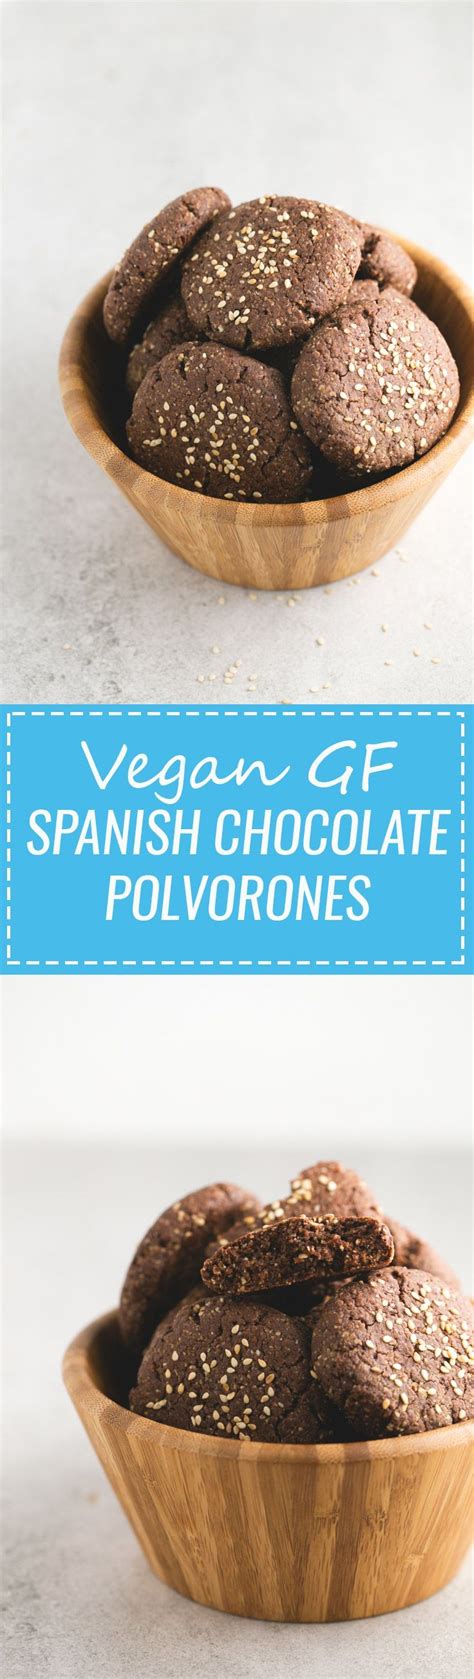 However, this is not all the ingredients to create the right mood: Vegan Gluten Free Spanish Chocolate Polvorones | Recipe ...